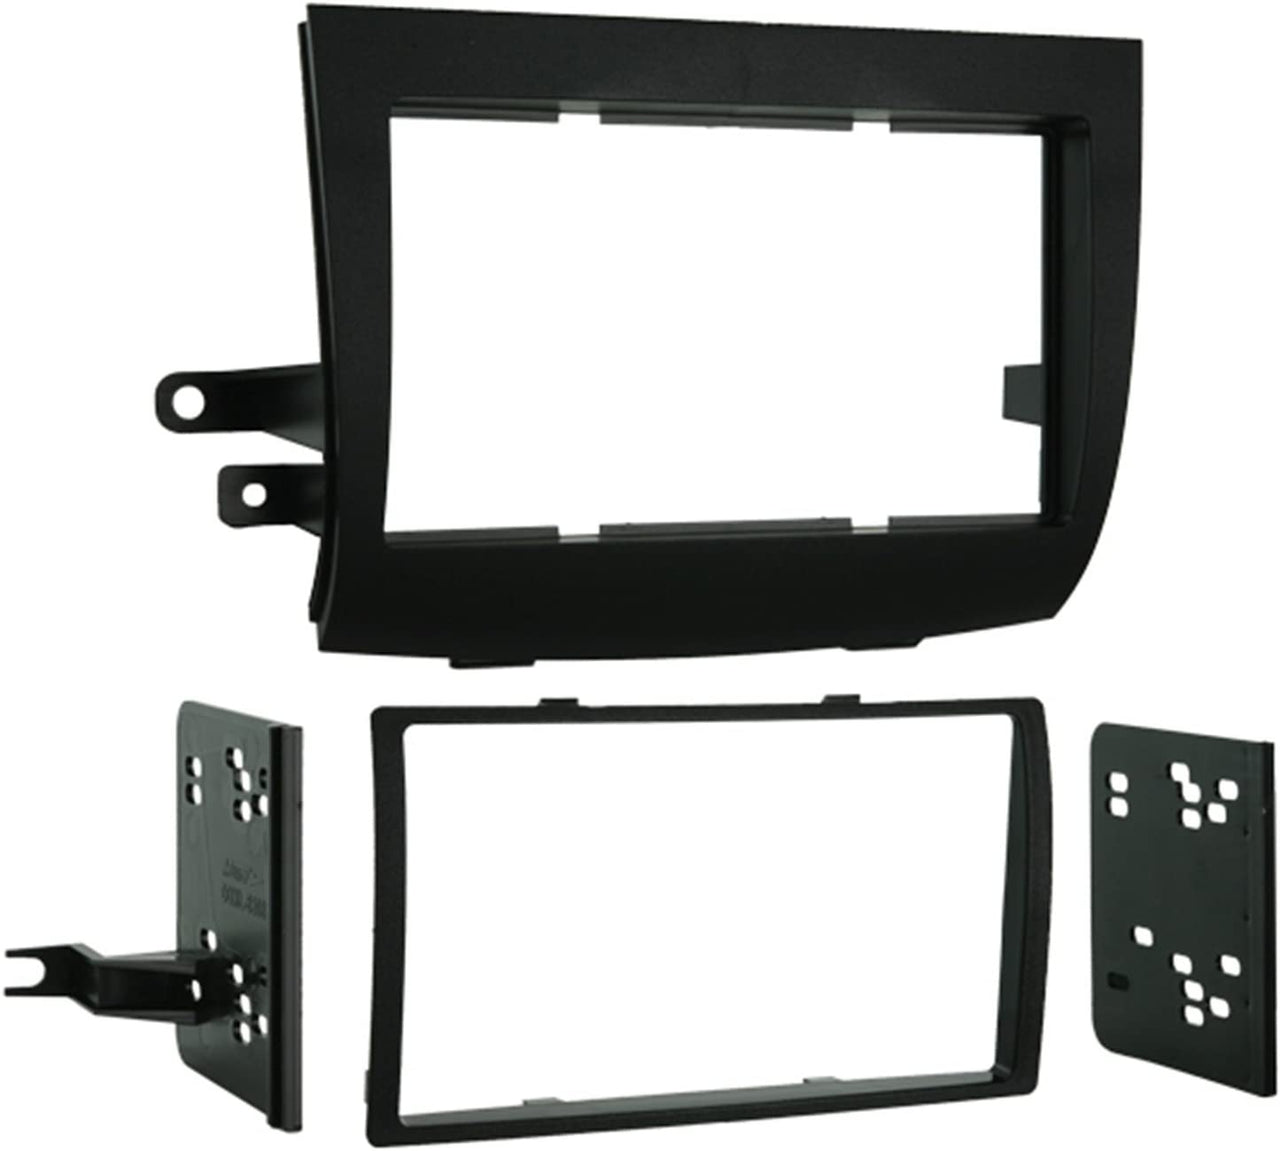 Metra 95-8208 Fits Toyota Sienna 2004-2010 Double DIN Stereo Harness Radio Install Dash Kit Package